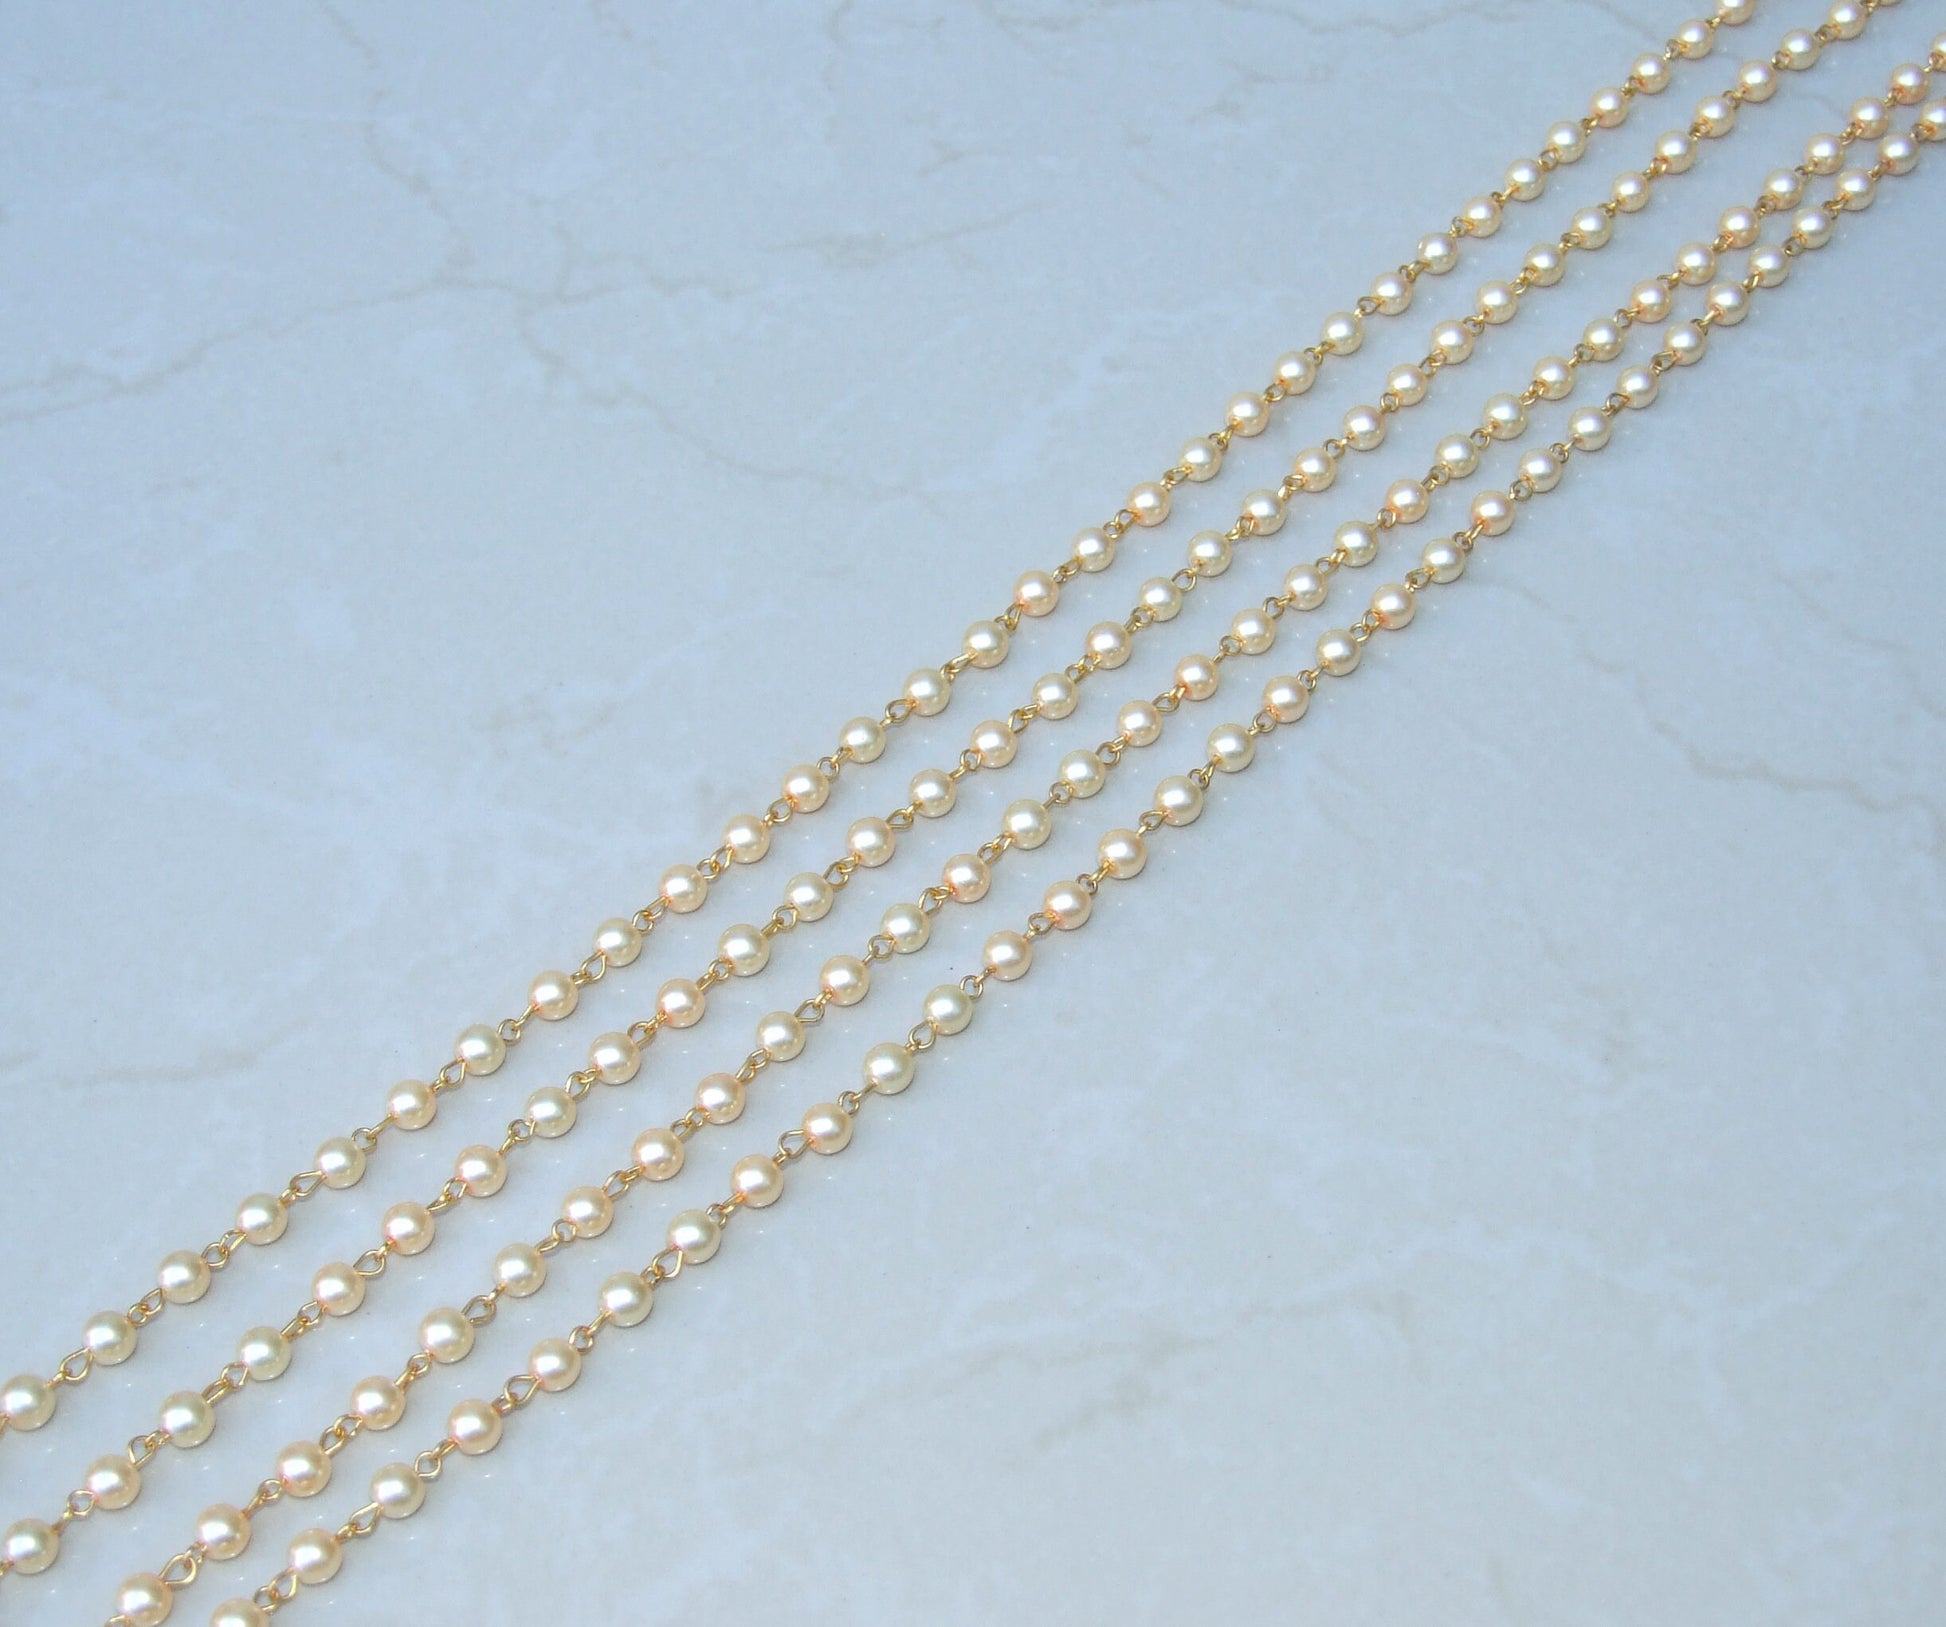 Gold Pearl Rosary Chain, 1 Meter, Bulk Chain, Round Glass Beads, Beaded Chain, Body Chain, Gold Chain, Necklace Chain, Belly Chain, 6mm